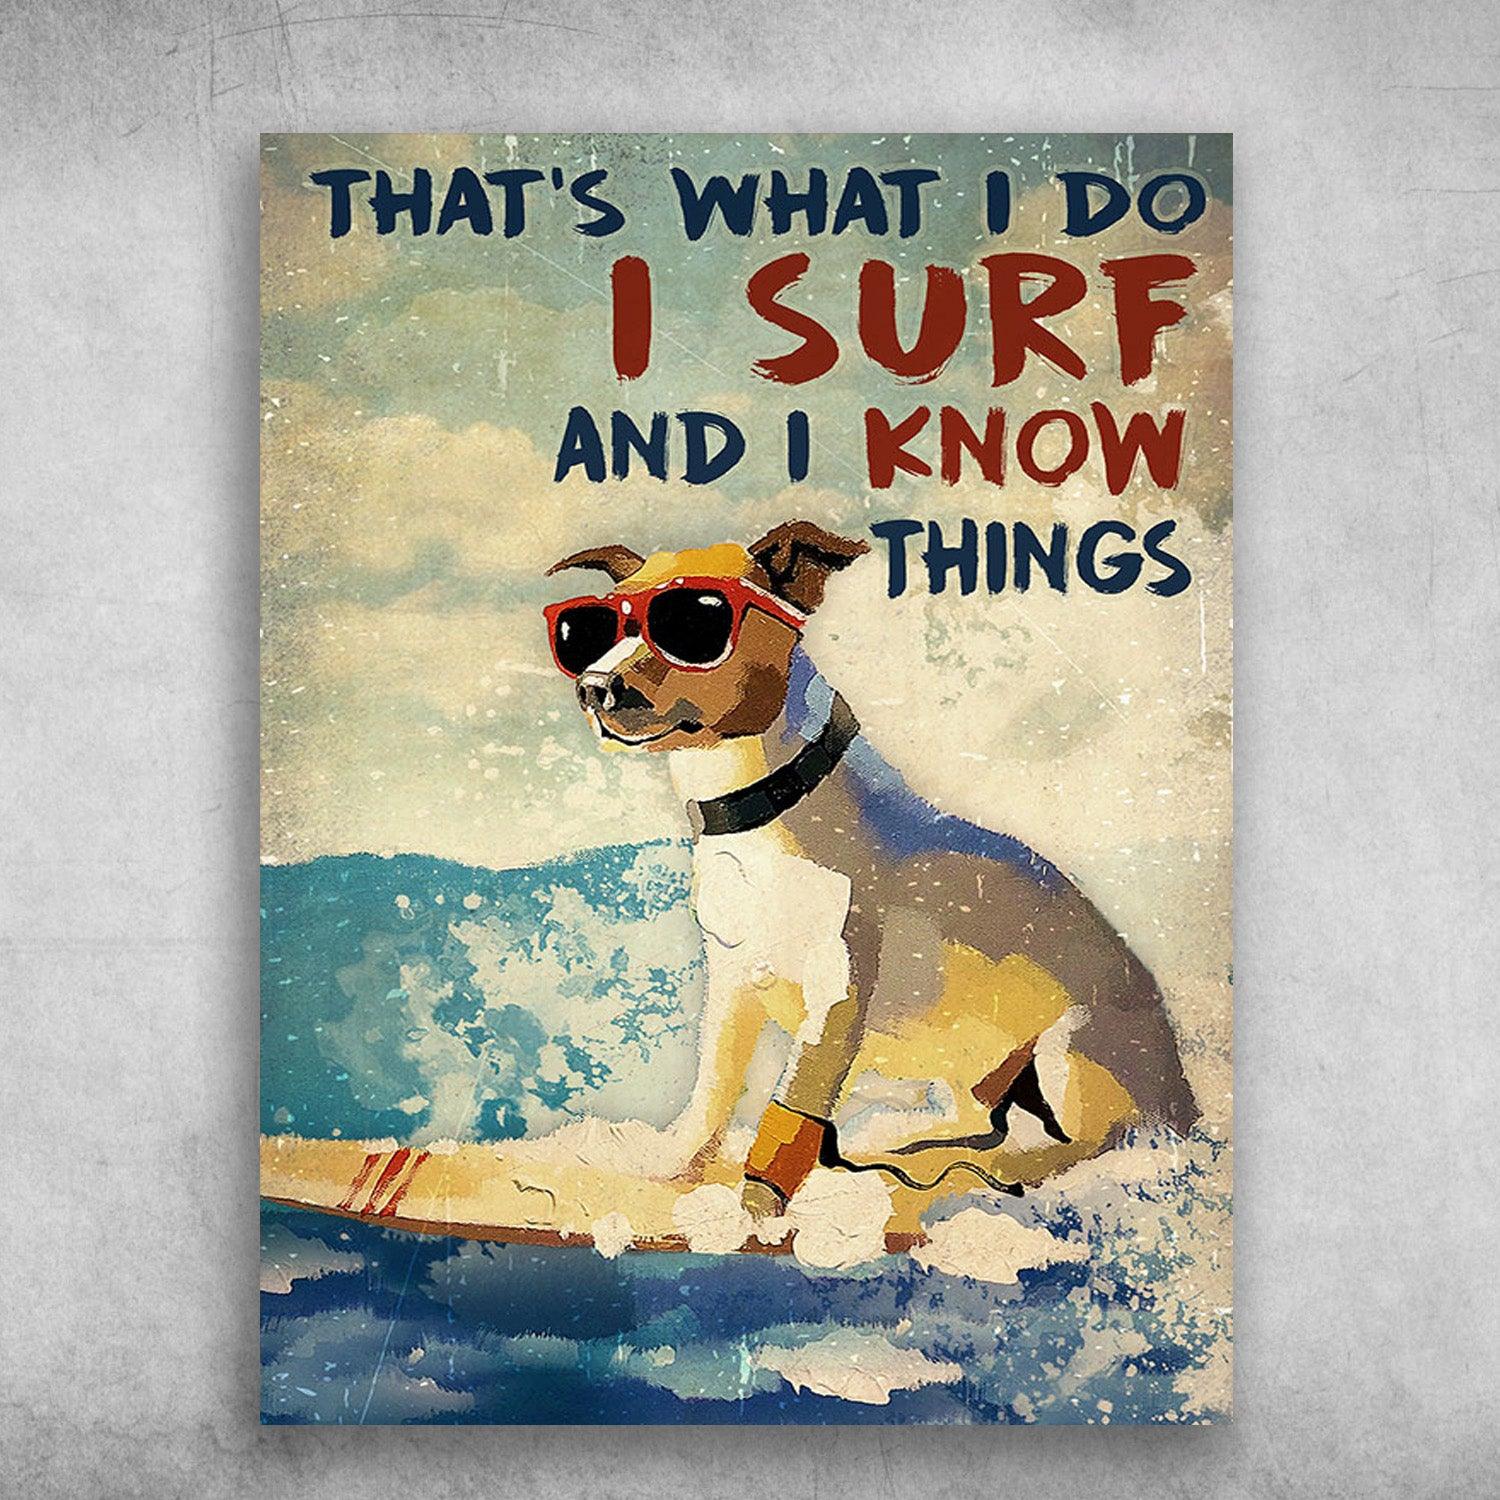 Surfing Dog Portrait Canvas - Surfing Dog That’s What I Do, I Surf, And I Know Things Portrait Canvas- Gift For Dog Lovers, Dog Owner, Friends, Family - Amzanimalsgift